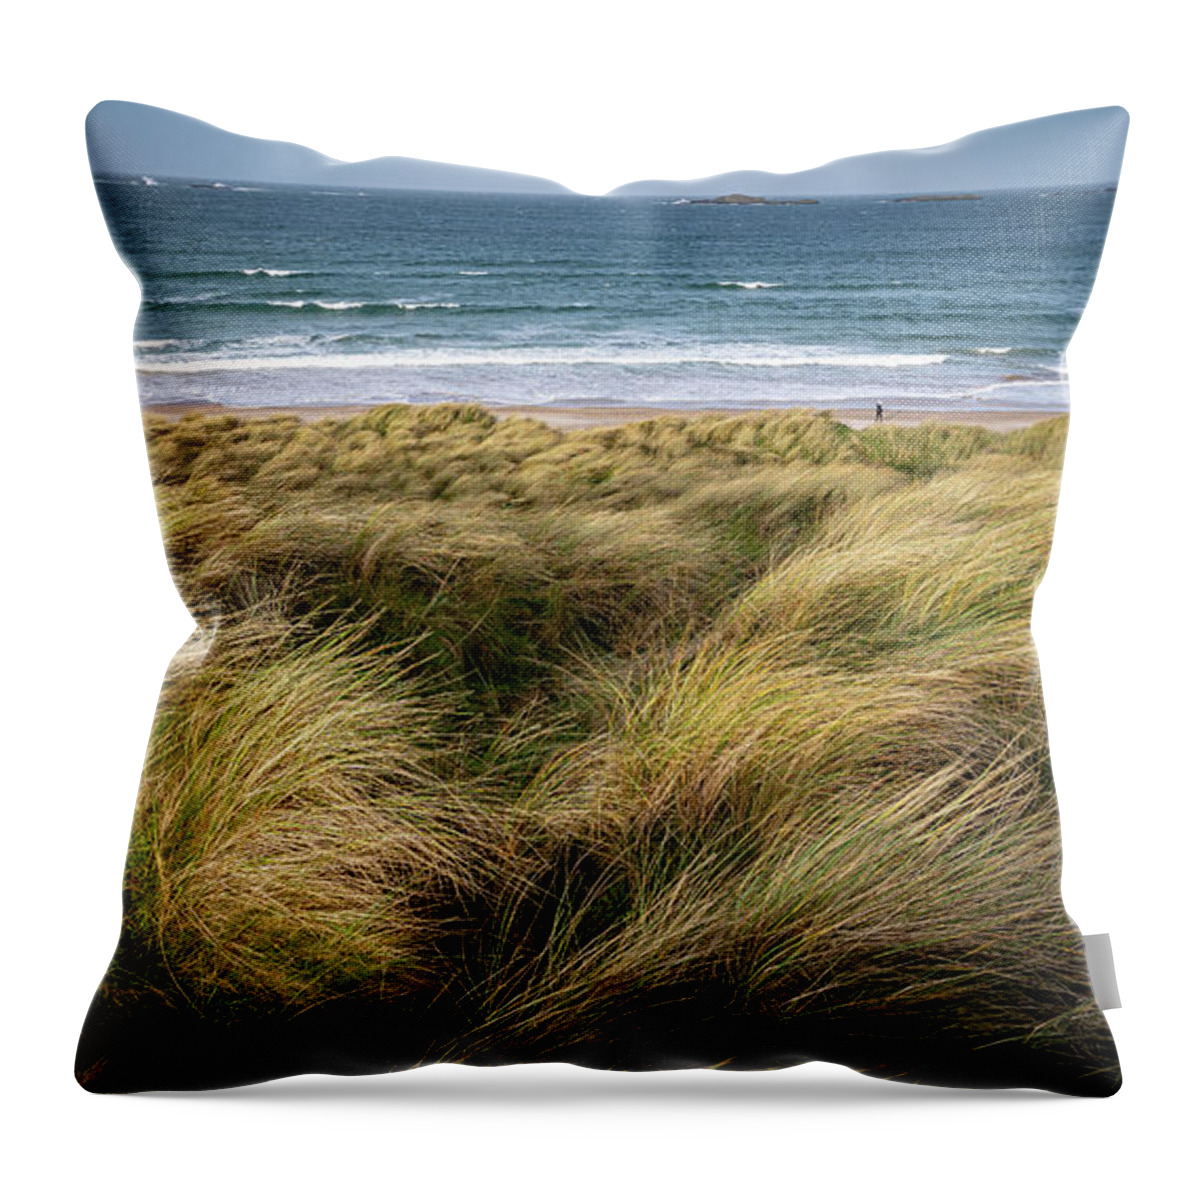 Portrush Throw Pillow featuring the photograph East Strand Dunes 2 by Nigel R Bell